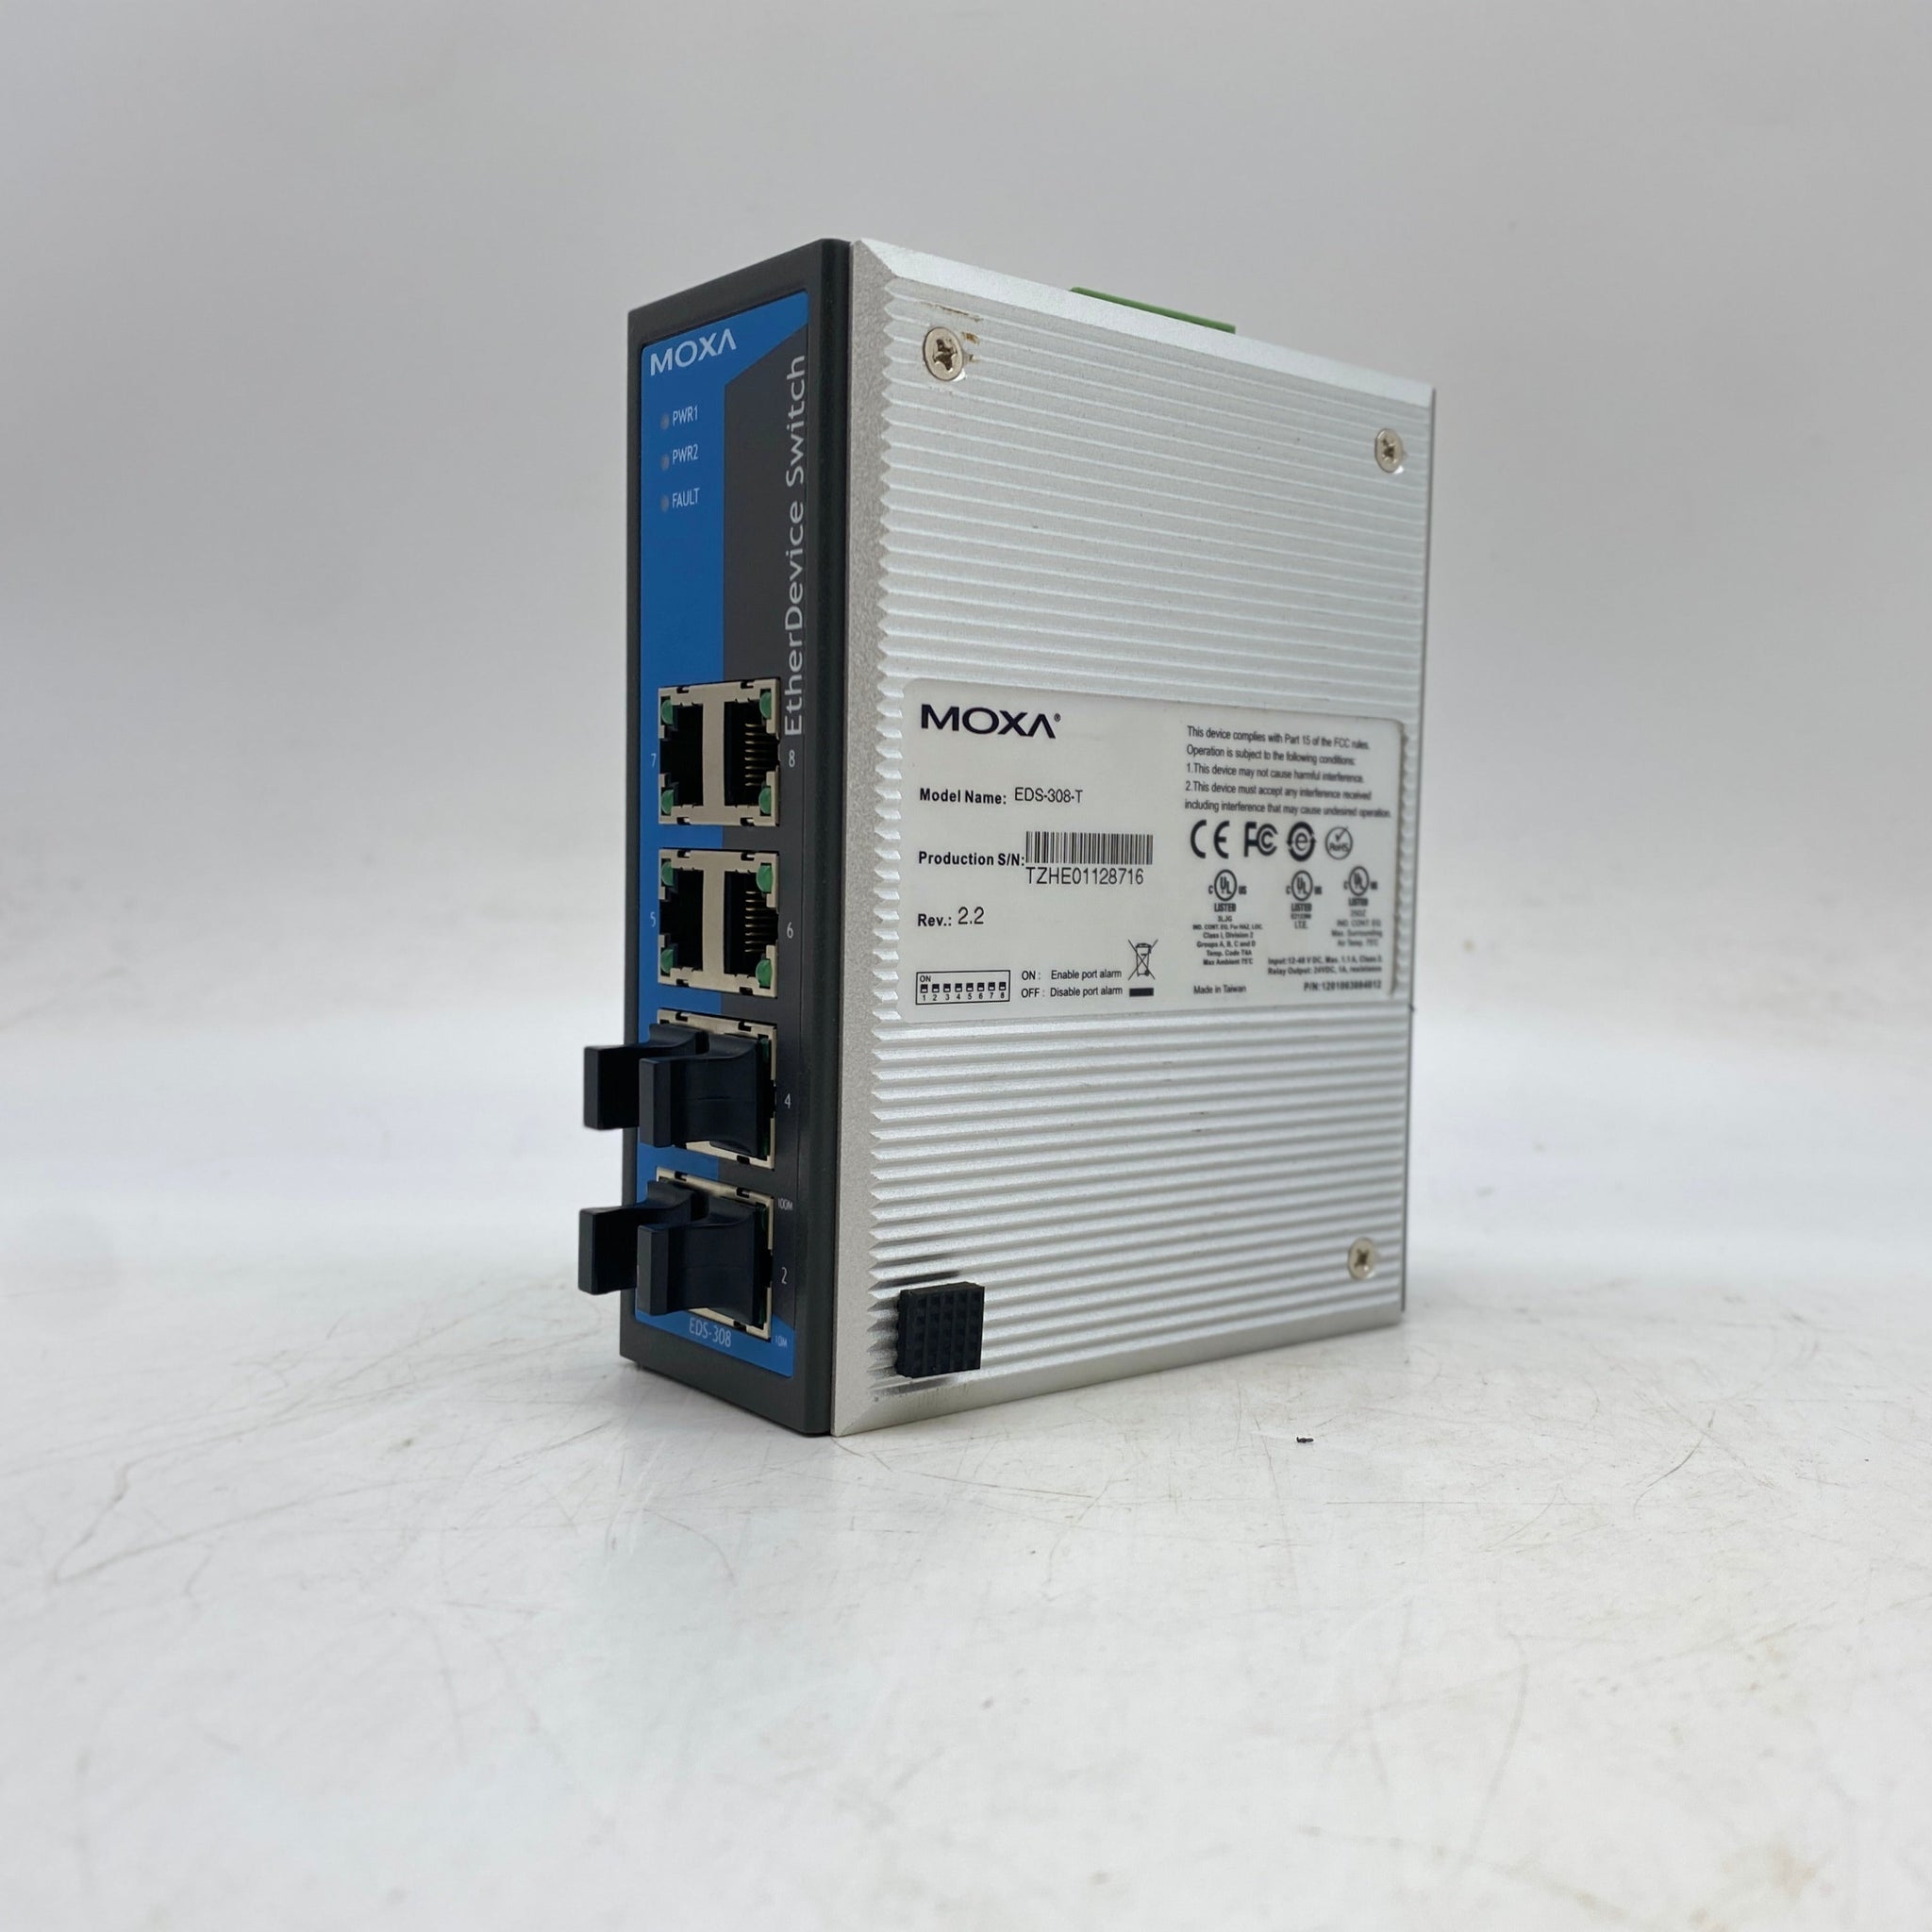 MOXA EDS-308-T Etherdevice Switch 8 Port, Rev 2.2 (Used) – Gulf